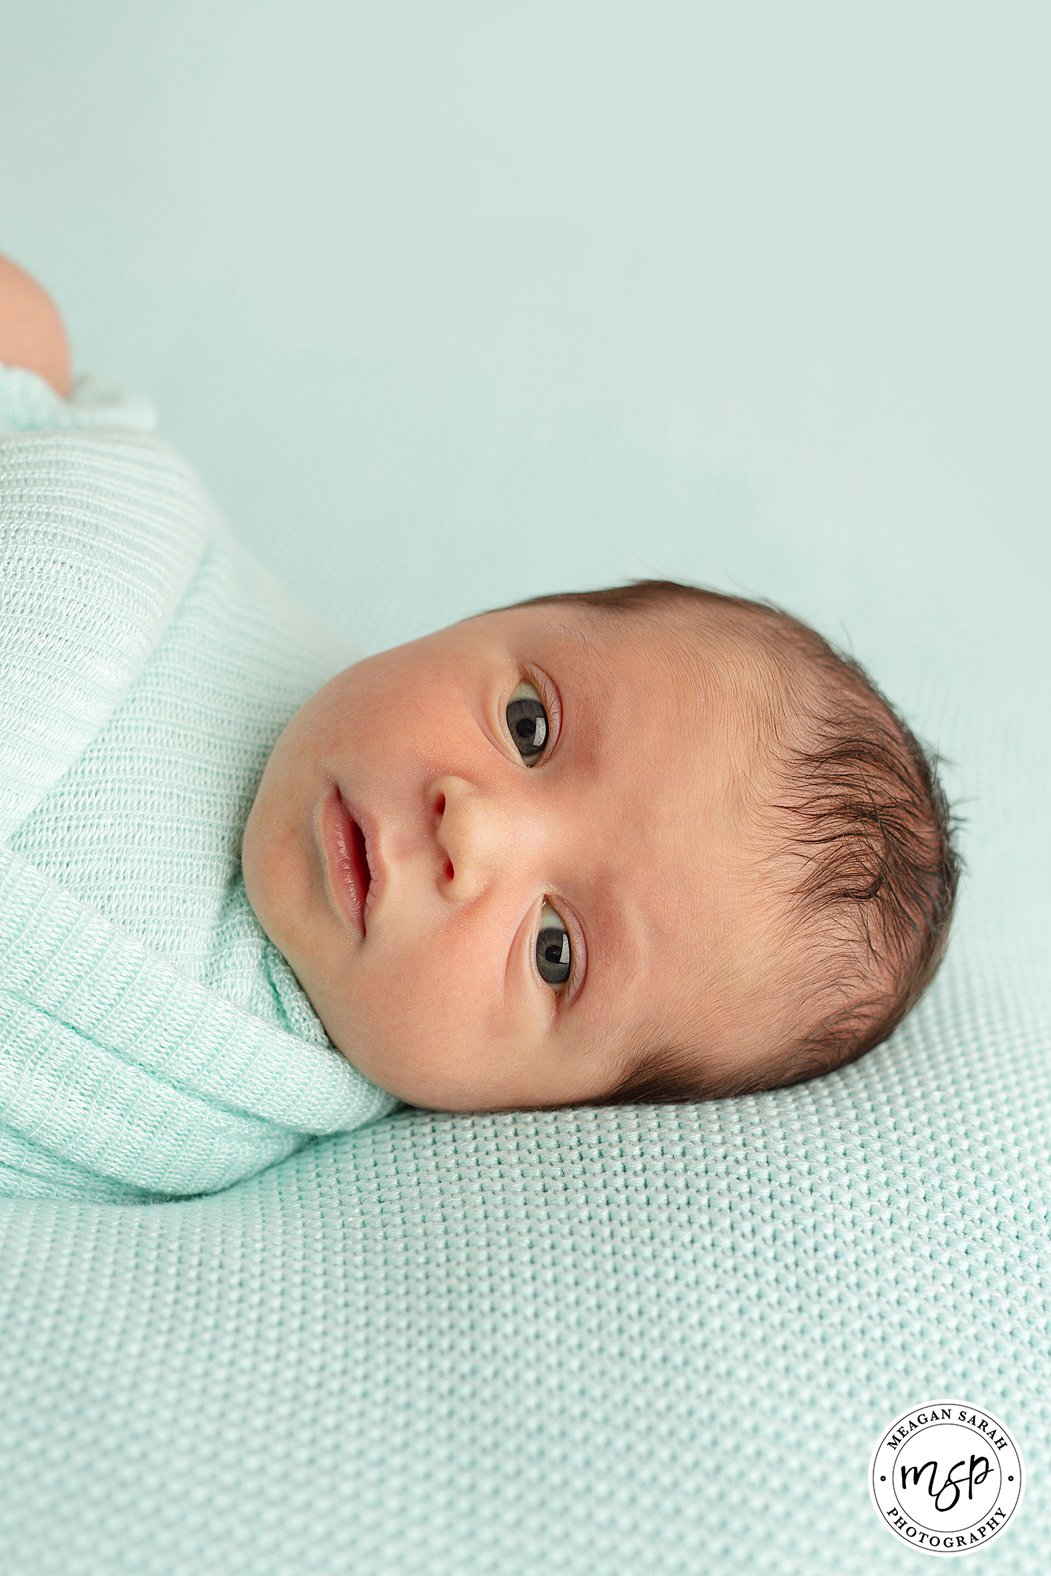 Turquoise,Turtle on back,Baby Photographer Leeds,Baby Photography Leeds,Leeds Newborn Photographer,Leeds Newborn Photography,Leeds Photographer,Professional Photographer in Leeds,West Yorkshire Photographer,Yorkshire Newborn Photographer,Yorkshire Newborn Photography,